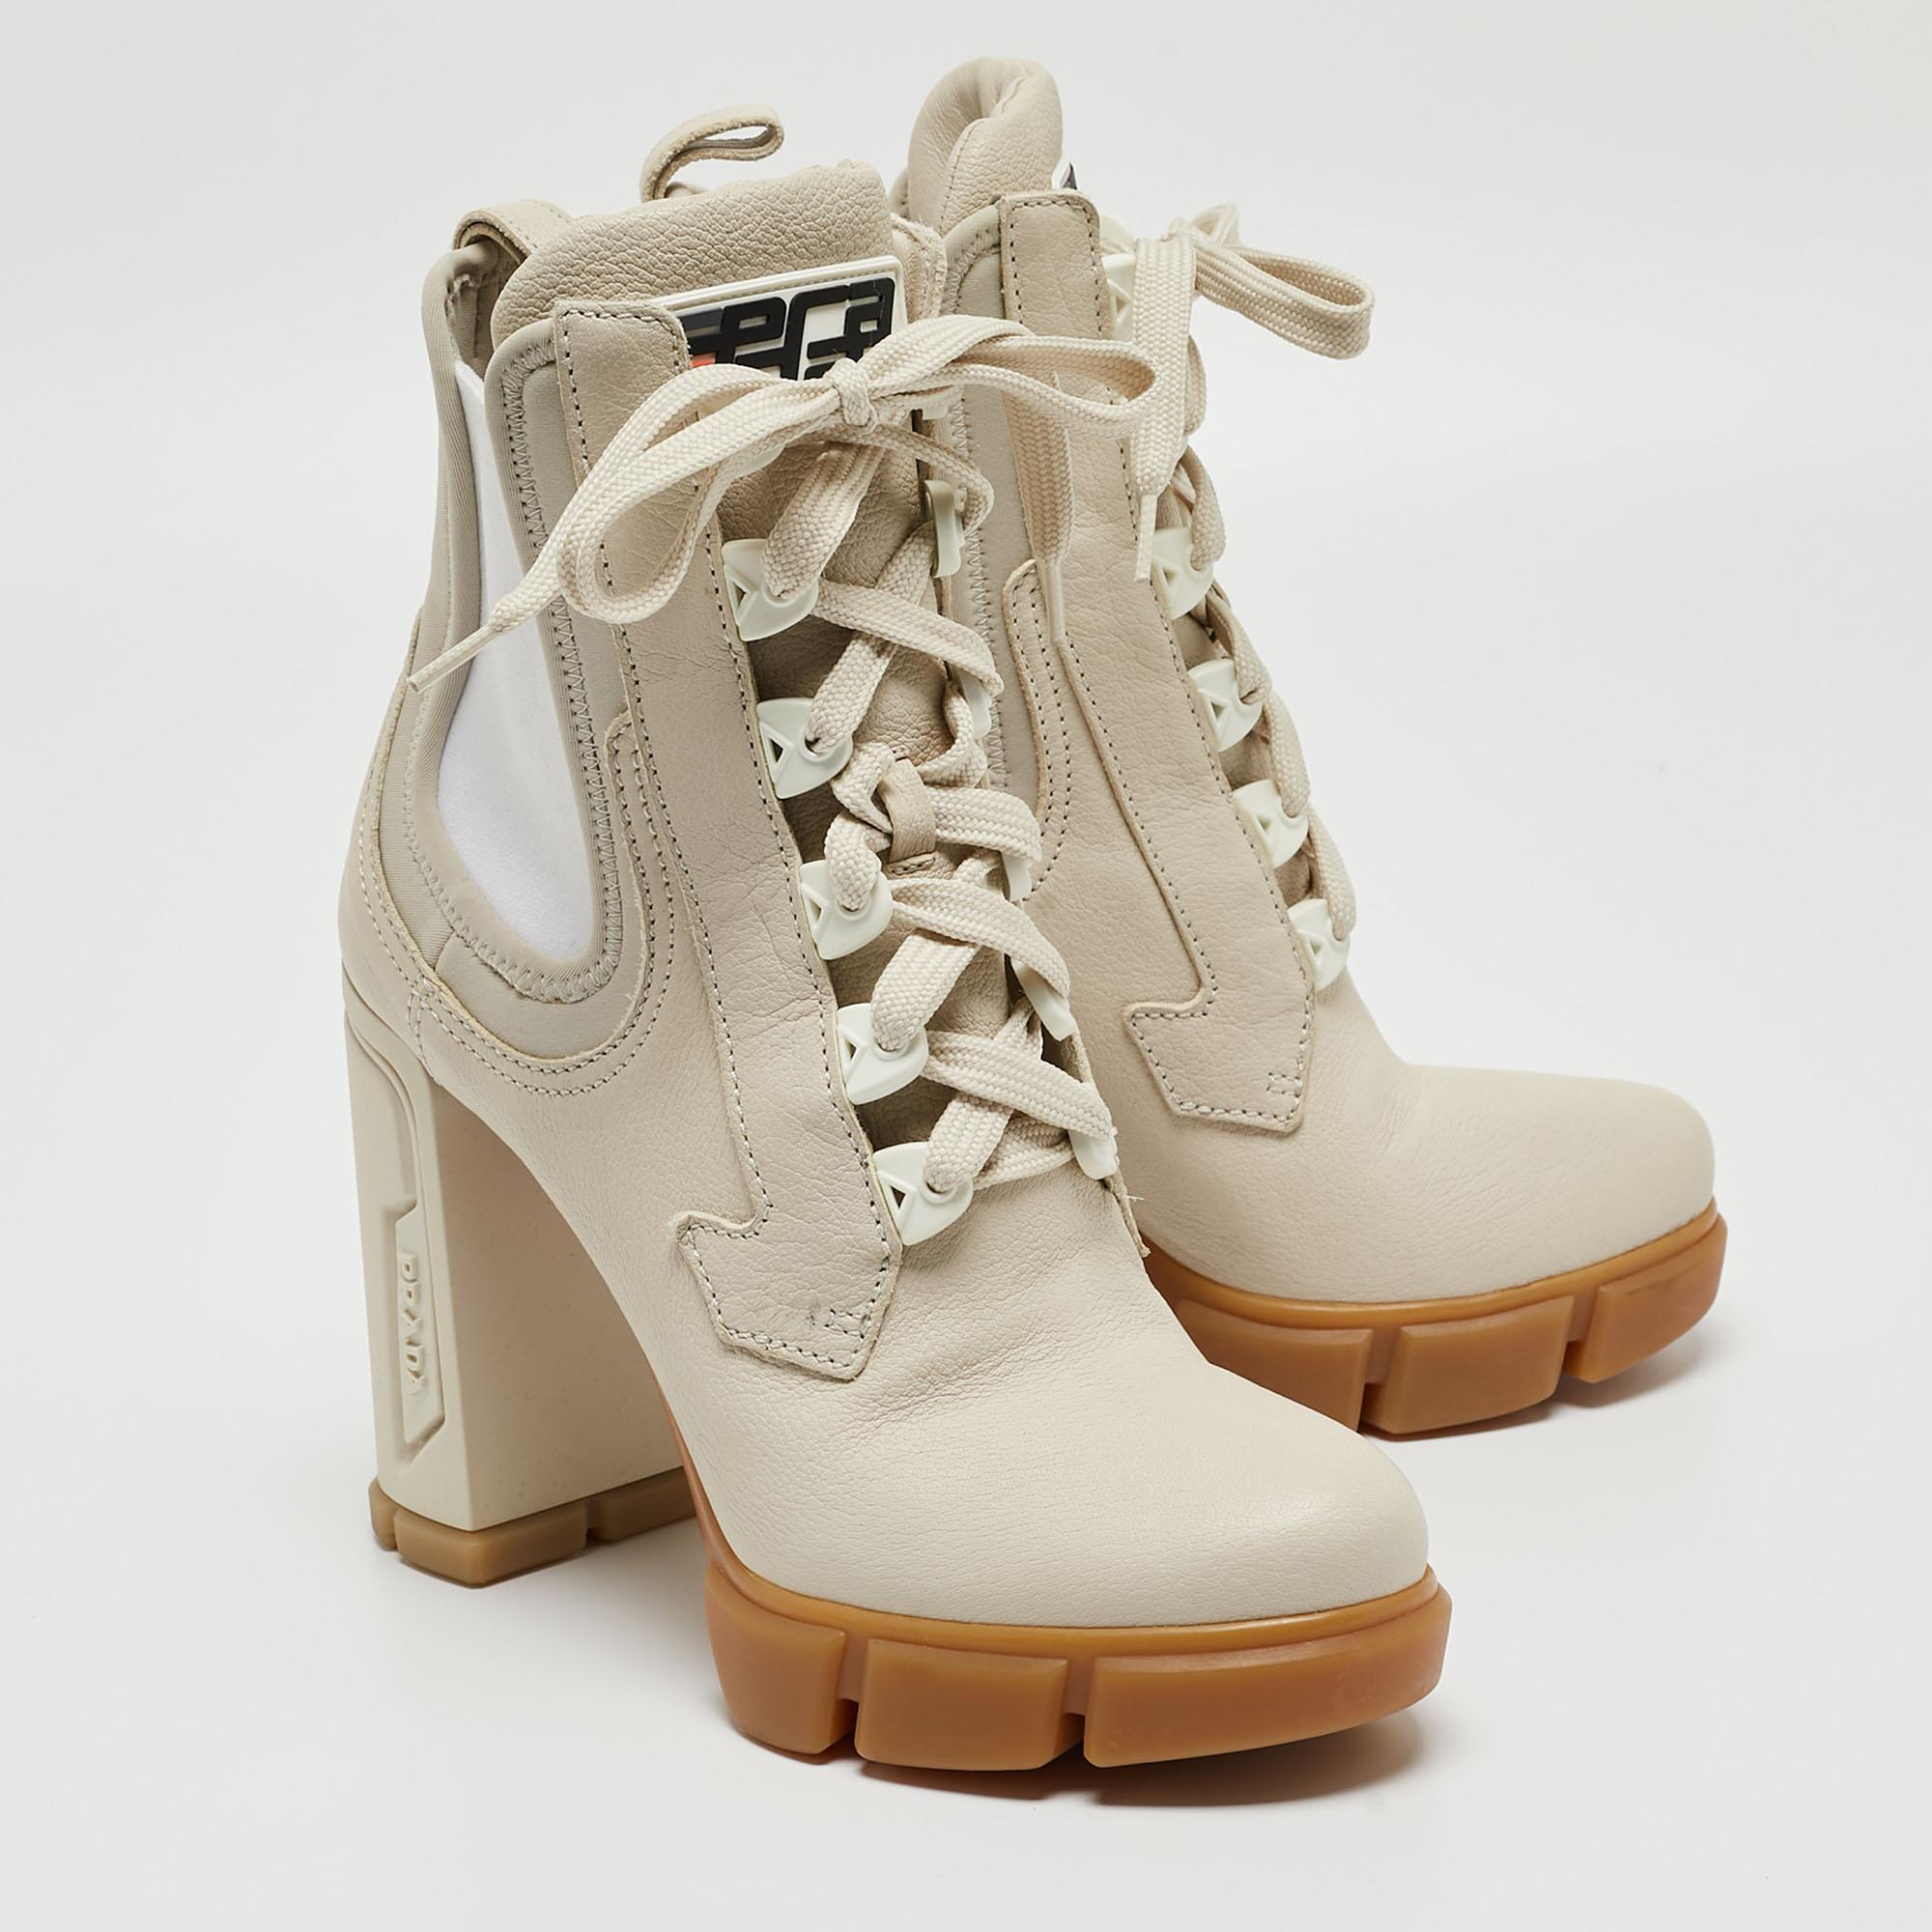 Beige Prada Cream Neoprene and Leather Lace Up Combat Boots Size 38